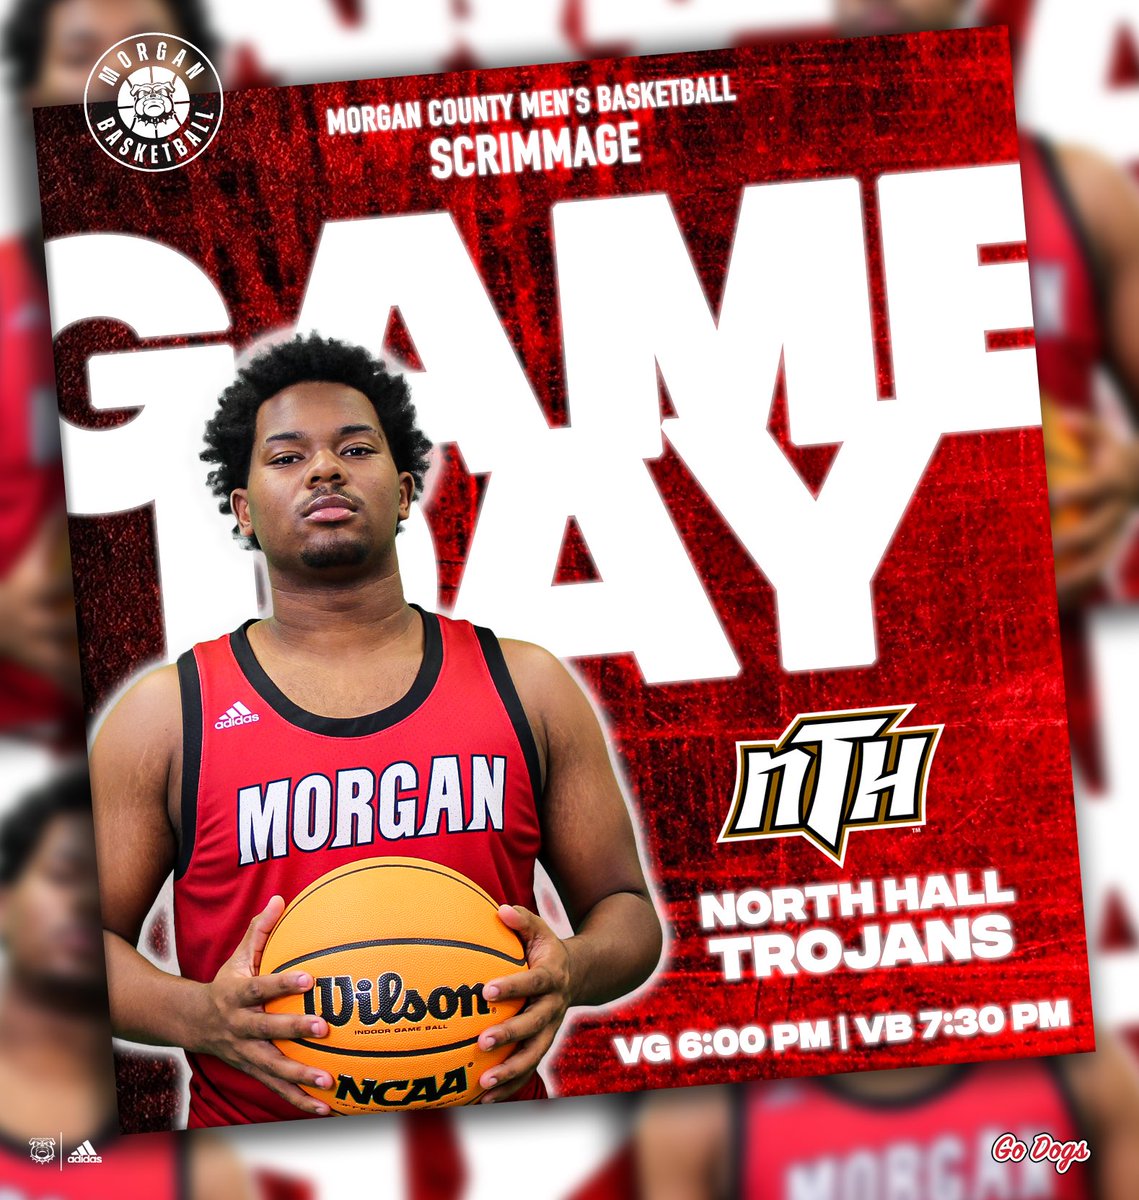 🚨 SCRIMMAGE 🚨 It’s GAME DAY in Gainesville, GA! 📍North Hall High School 🆚 @NTHbasketball ⏰ VG - 6:00 PM | VB - 7:30 PM “The journey of a thousand miles begins with a single step” - Lao Tzu Go Dogs! 🔴⚫️